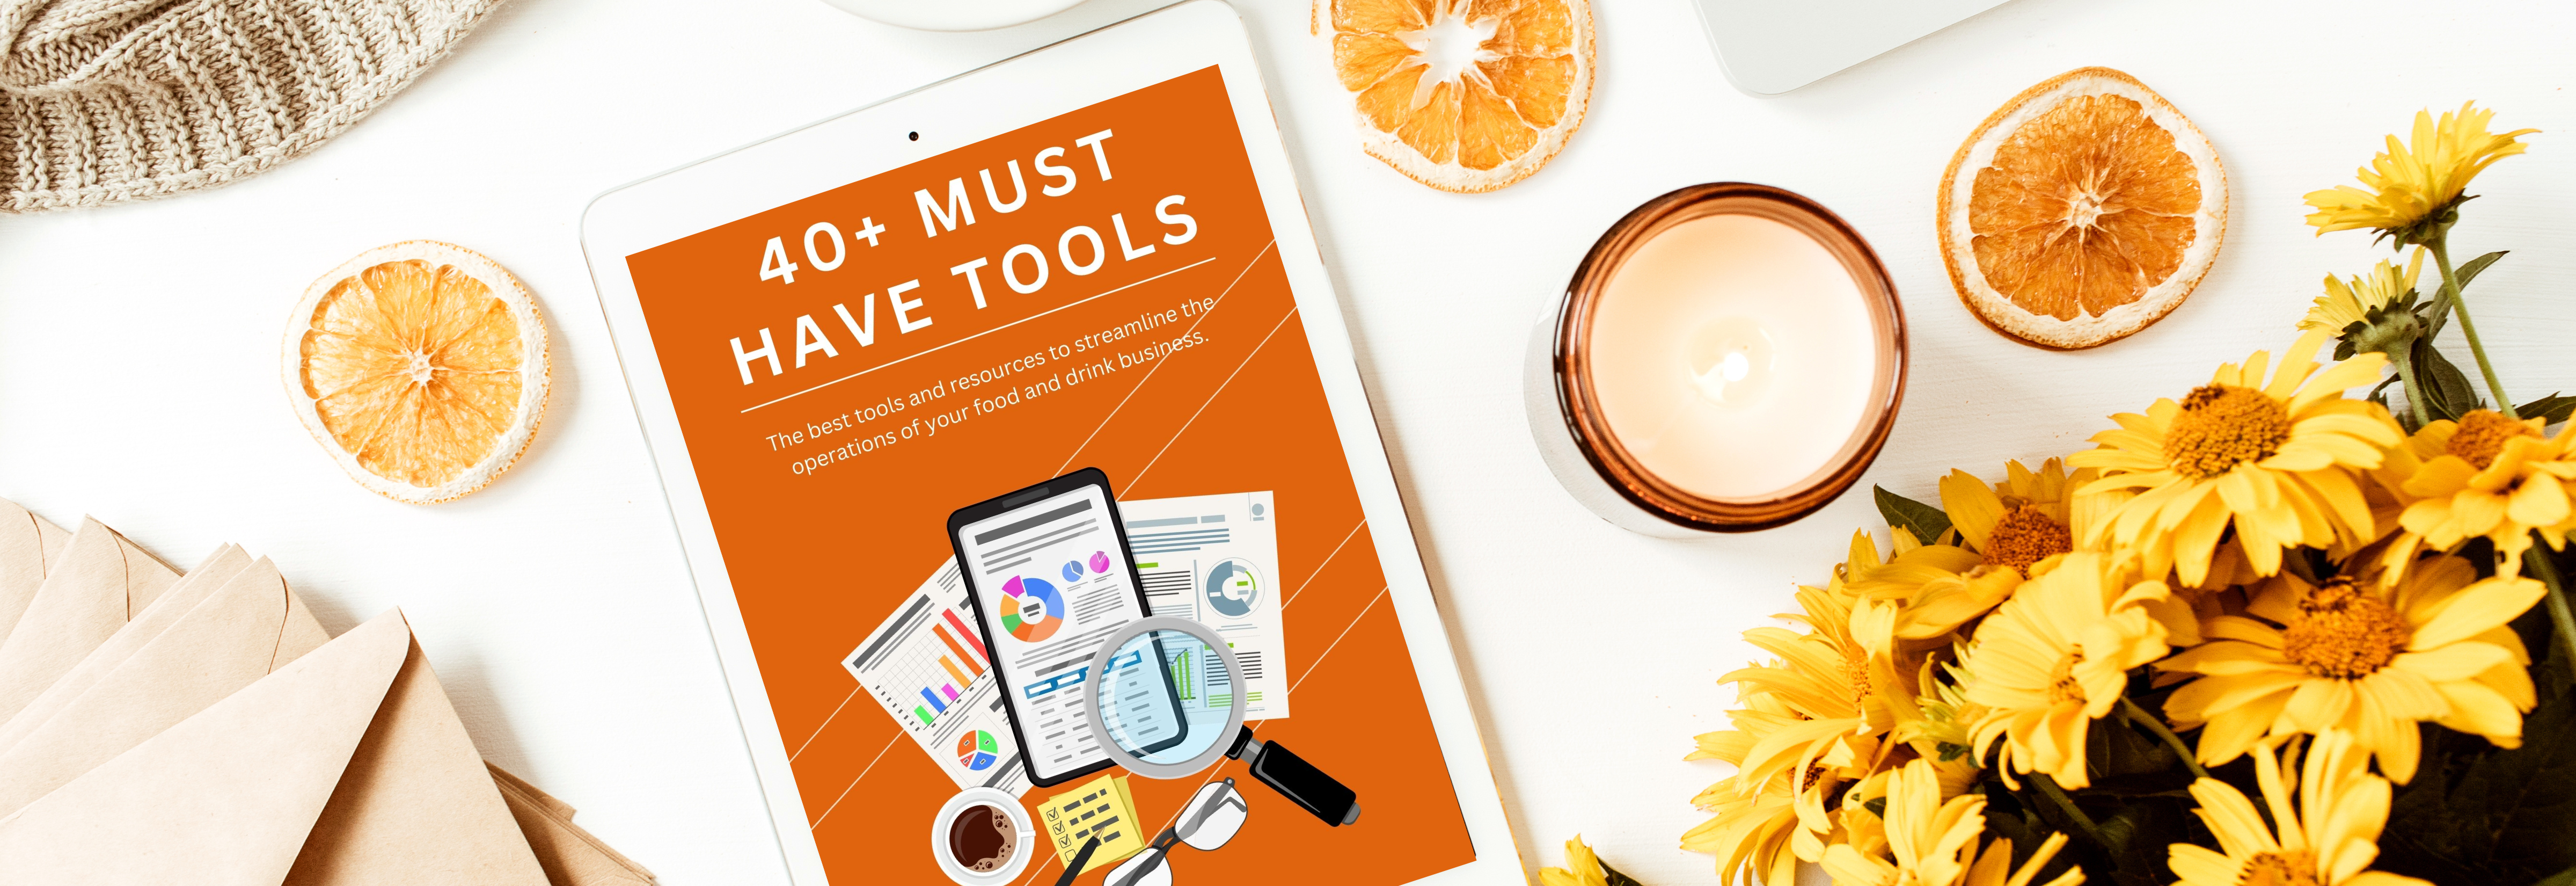 40+ Must Have Tools for Food and Drink Business